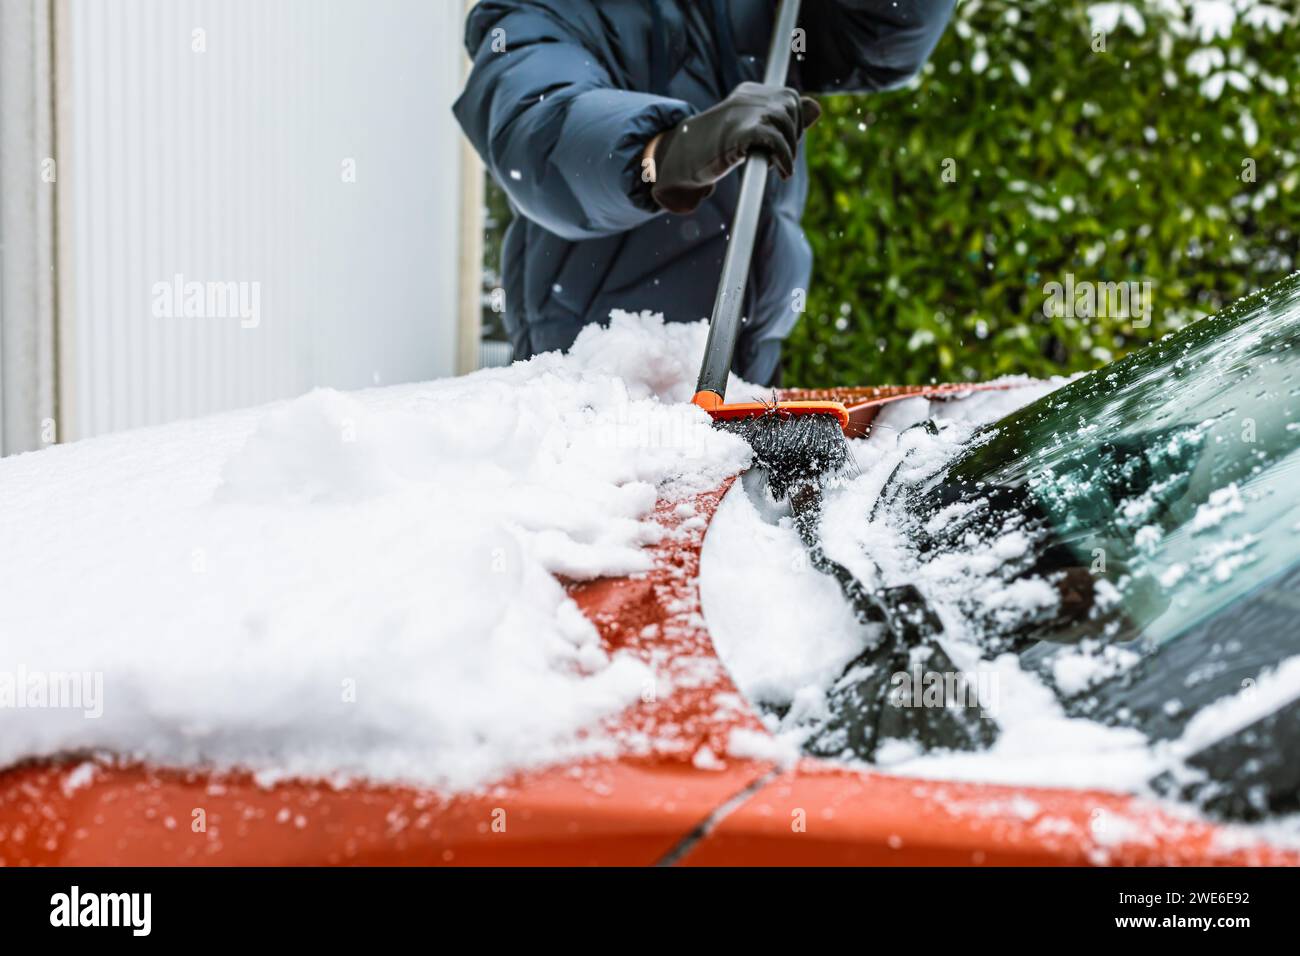 Cleaning snow from windshield. Cleaning and clearing the car from snow on a winter day. Stock Photo